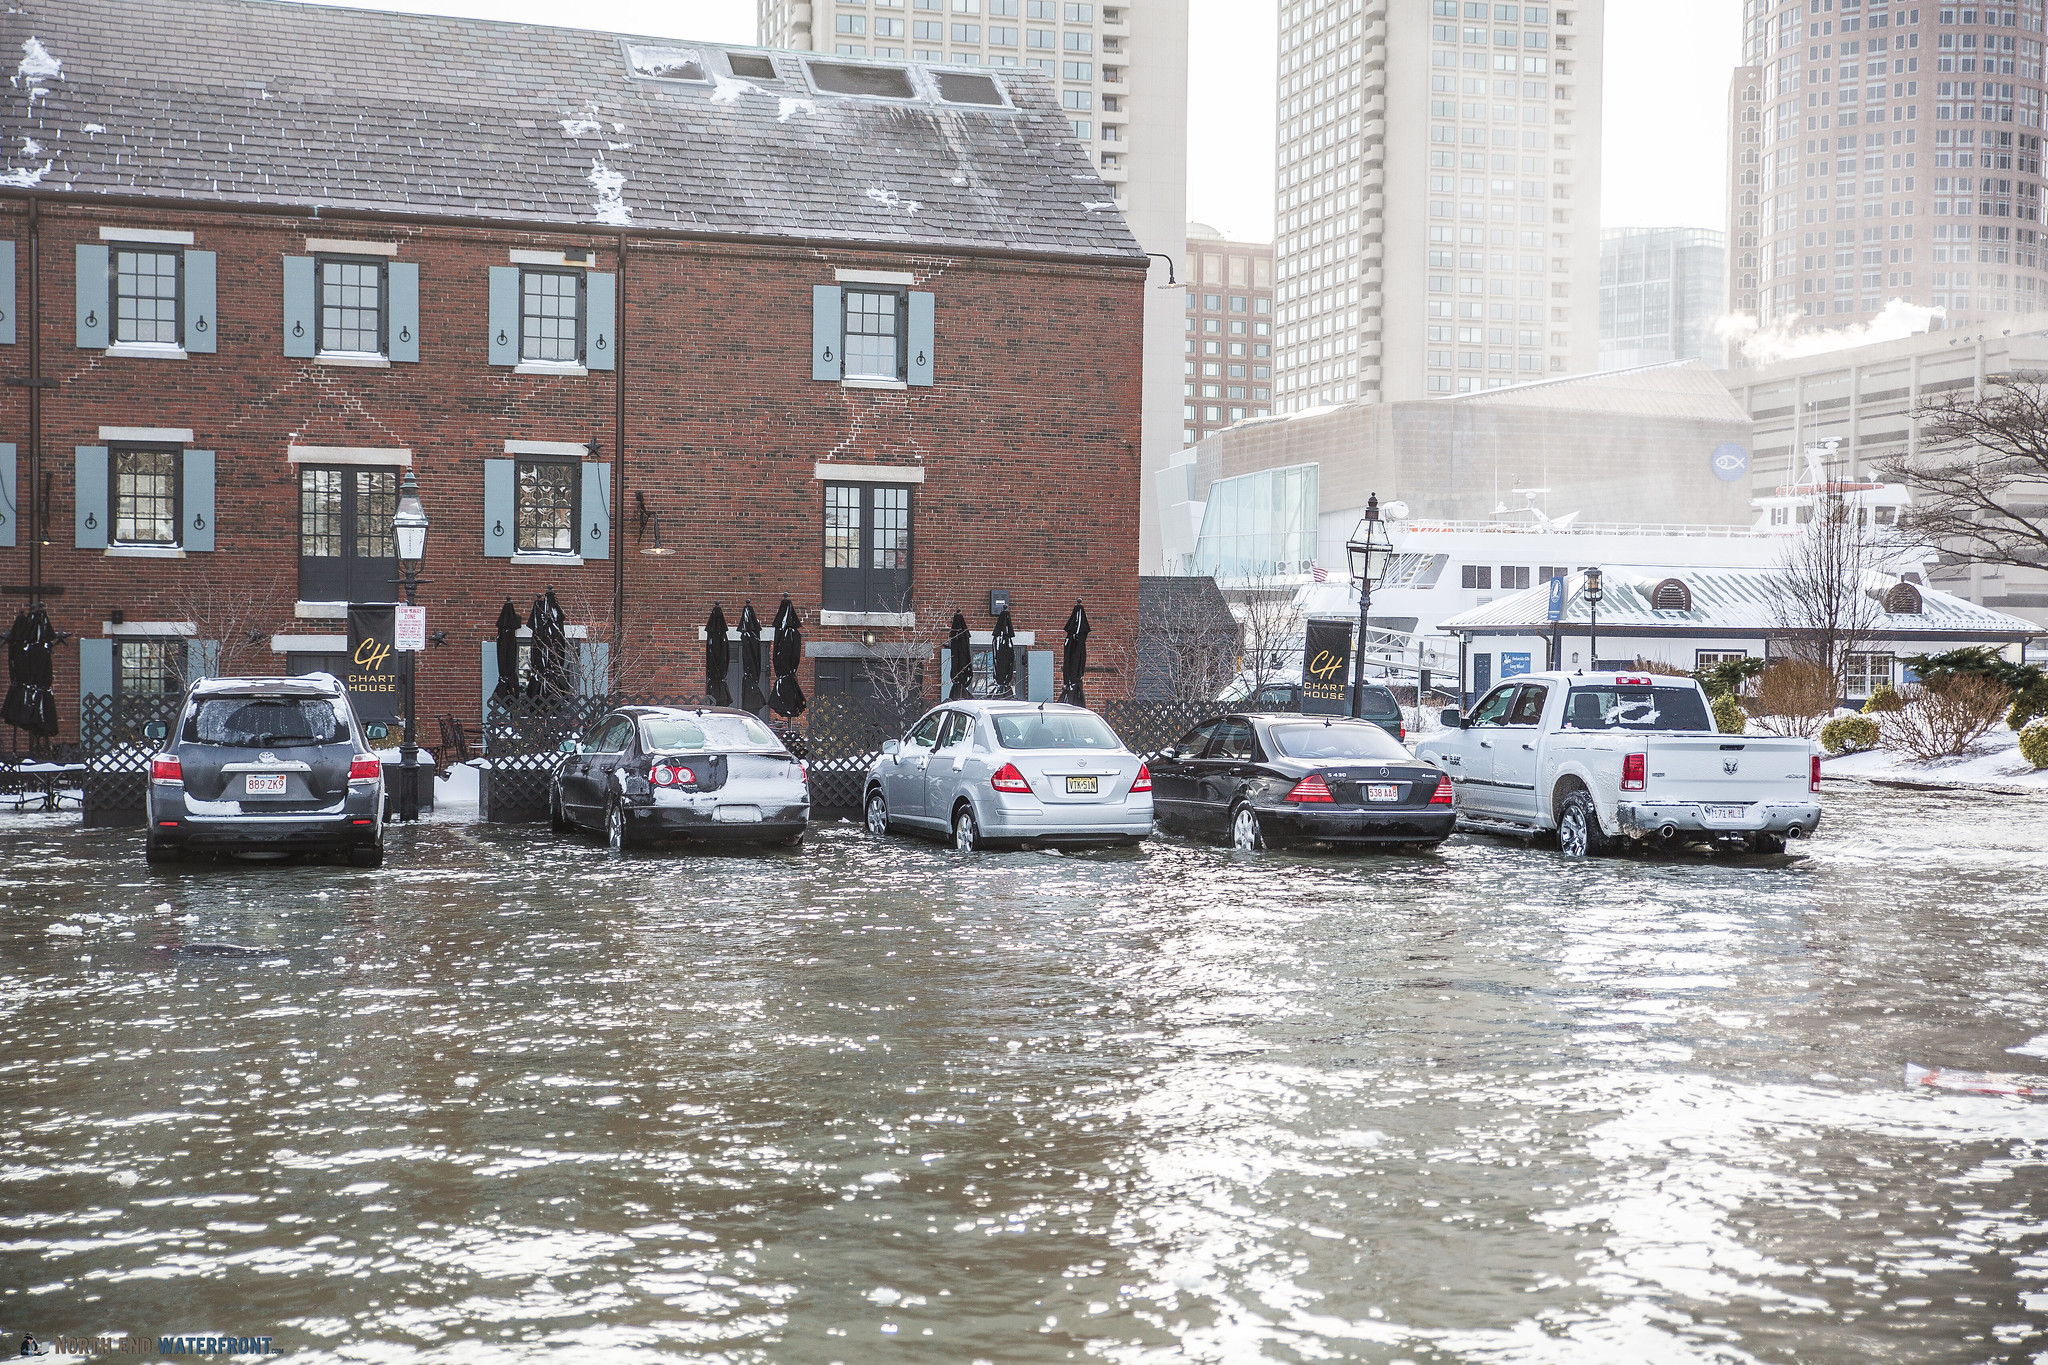 Flooding is becoming more common along Boston's coastline.